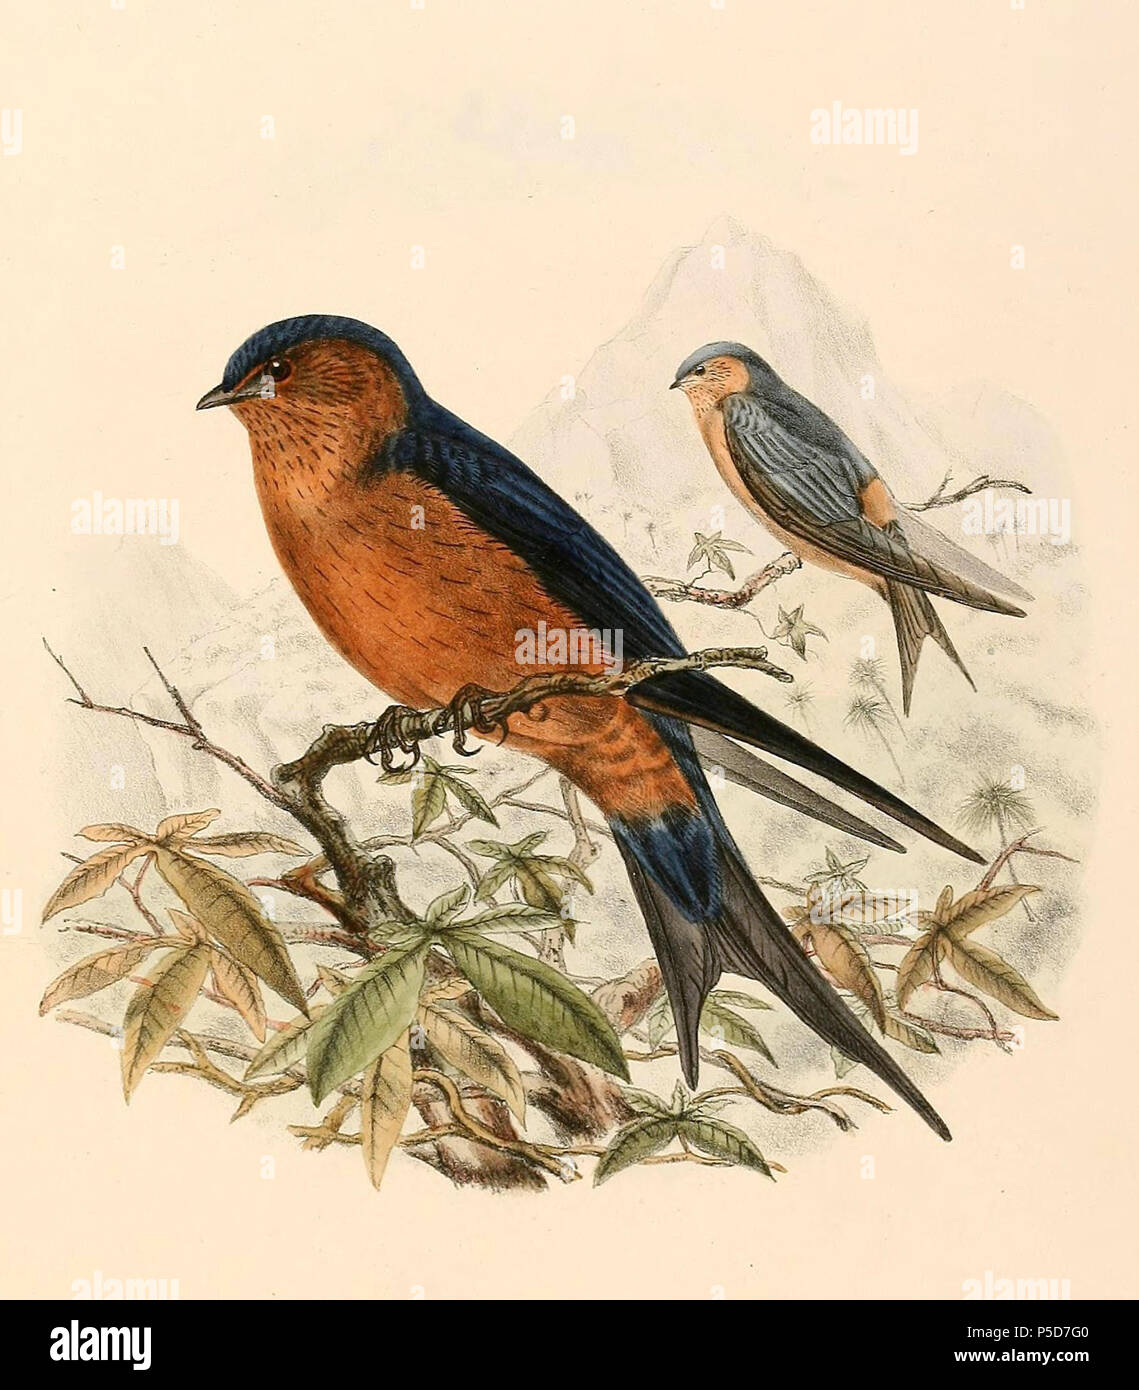 N/A. English: « Hirundo hyperythra » = Cecropis hyperythra (Sri Lanka Swallow) Français : « Hirundo hyperythra » = Cecropis hyperythra (Hirondelle du Sri Lanka) . 1894.   Richard Bowdler Sharpe  (1847–1909)      Alternative names Sharpe  Description British ornithologist and zoologist  Date of birth/death 22 November 1847 25 December 1909  Location of birth/death London Chiswick  Authority control  : Q432586 VIAF:54295317 ISNI:0000 0000 8383 5302 LCCN:n87151105 NLA:35218453 Open Library:OL2424873A WorldCat 285 Cecropis hyperythra 1894 Stock Photo